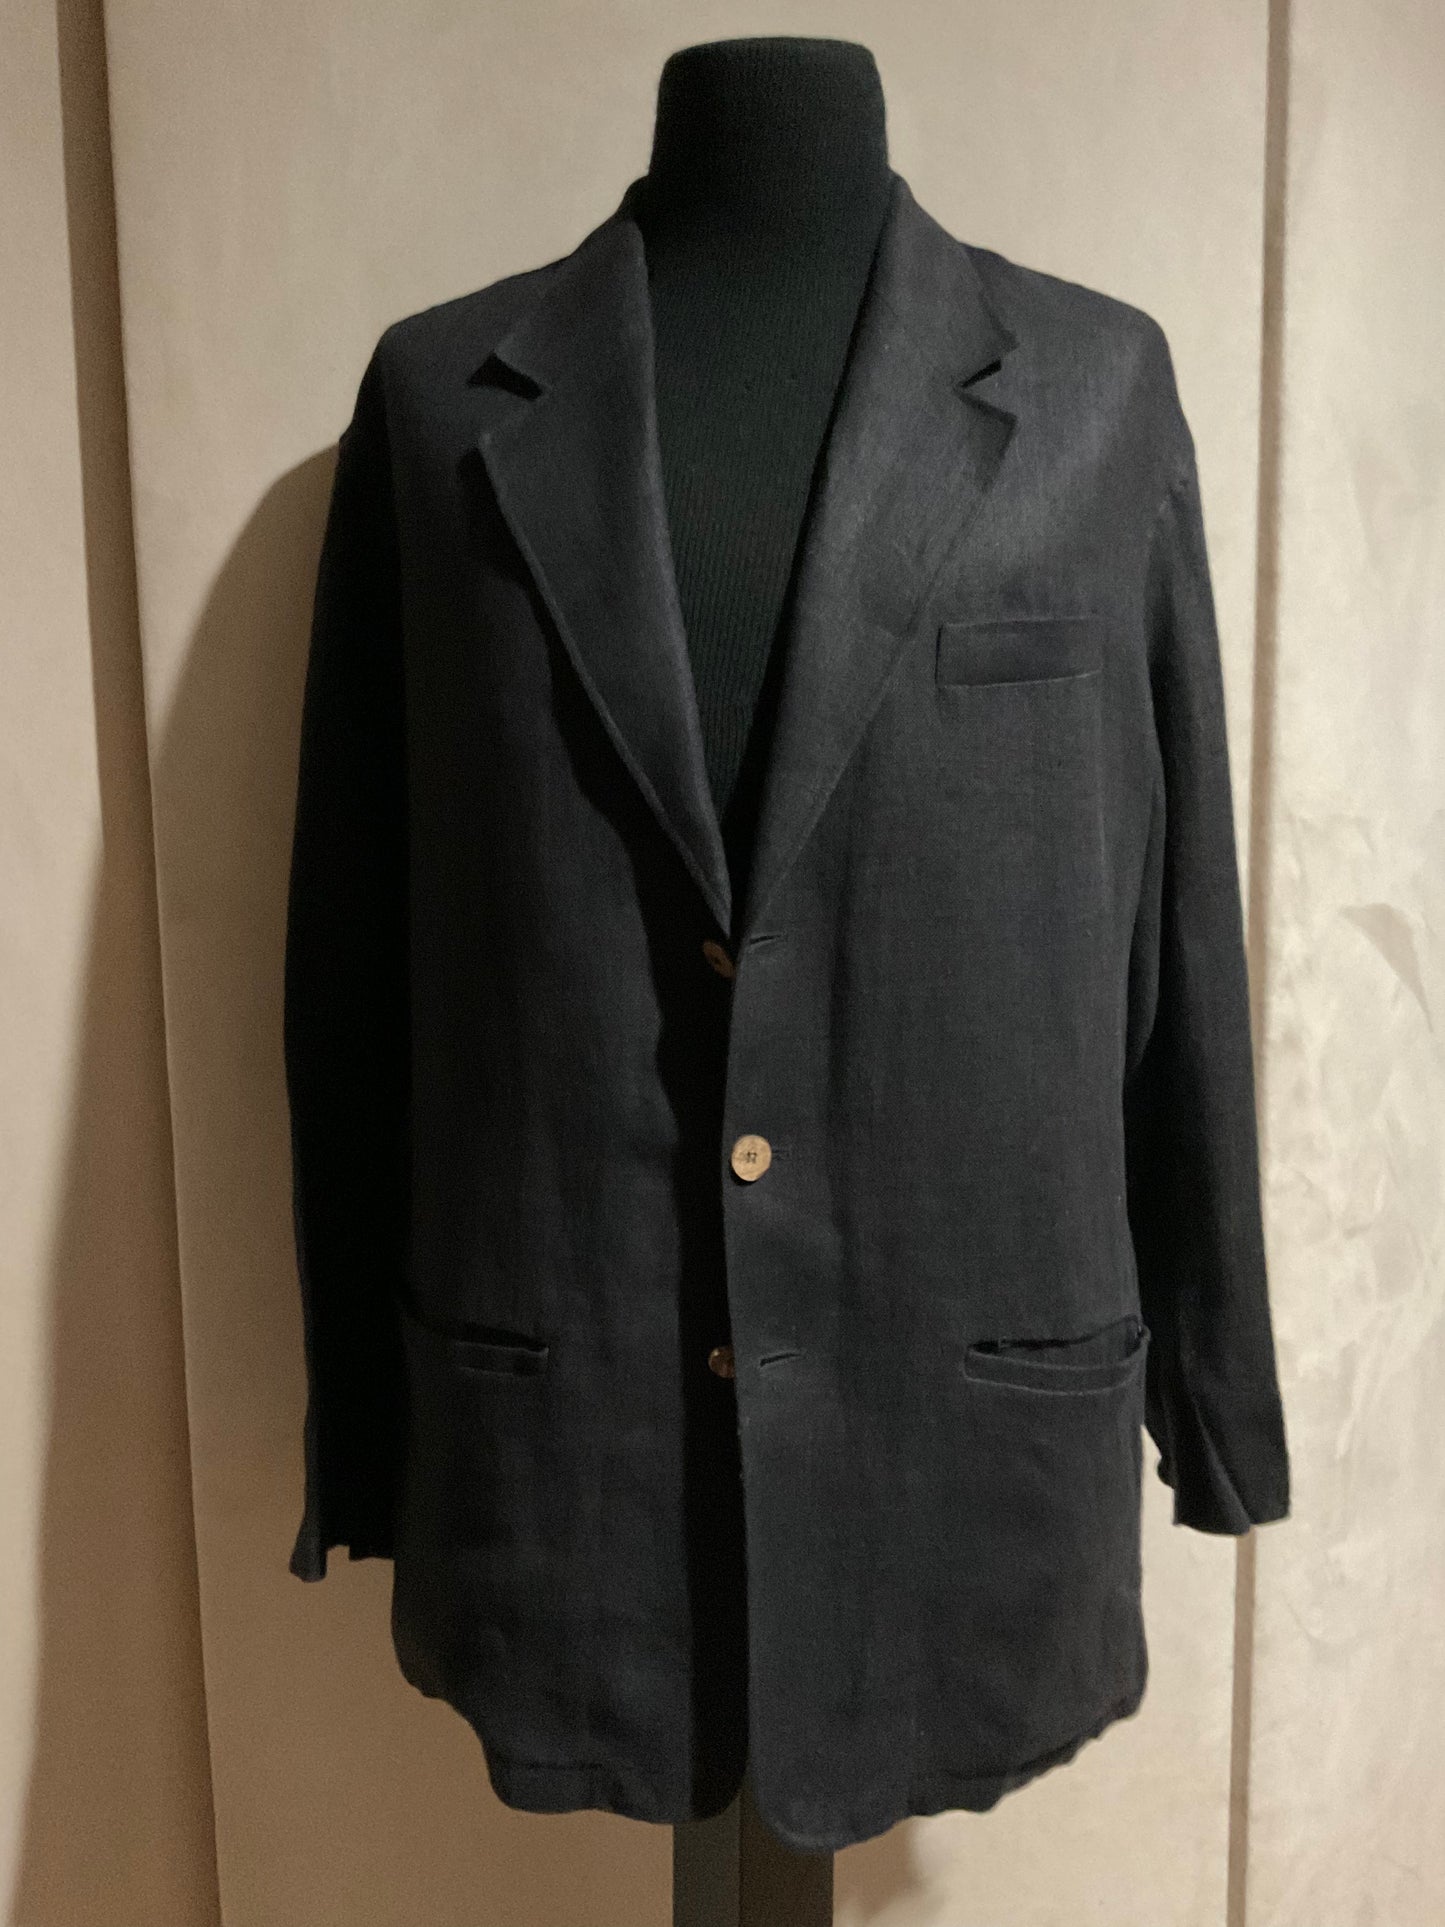 R P SPORTS JACKET / BLACK LINEN / UNCONSTRUCTED / MEDIUM - LARGE / NEW / MADE IN ITALY